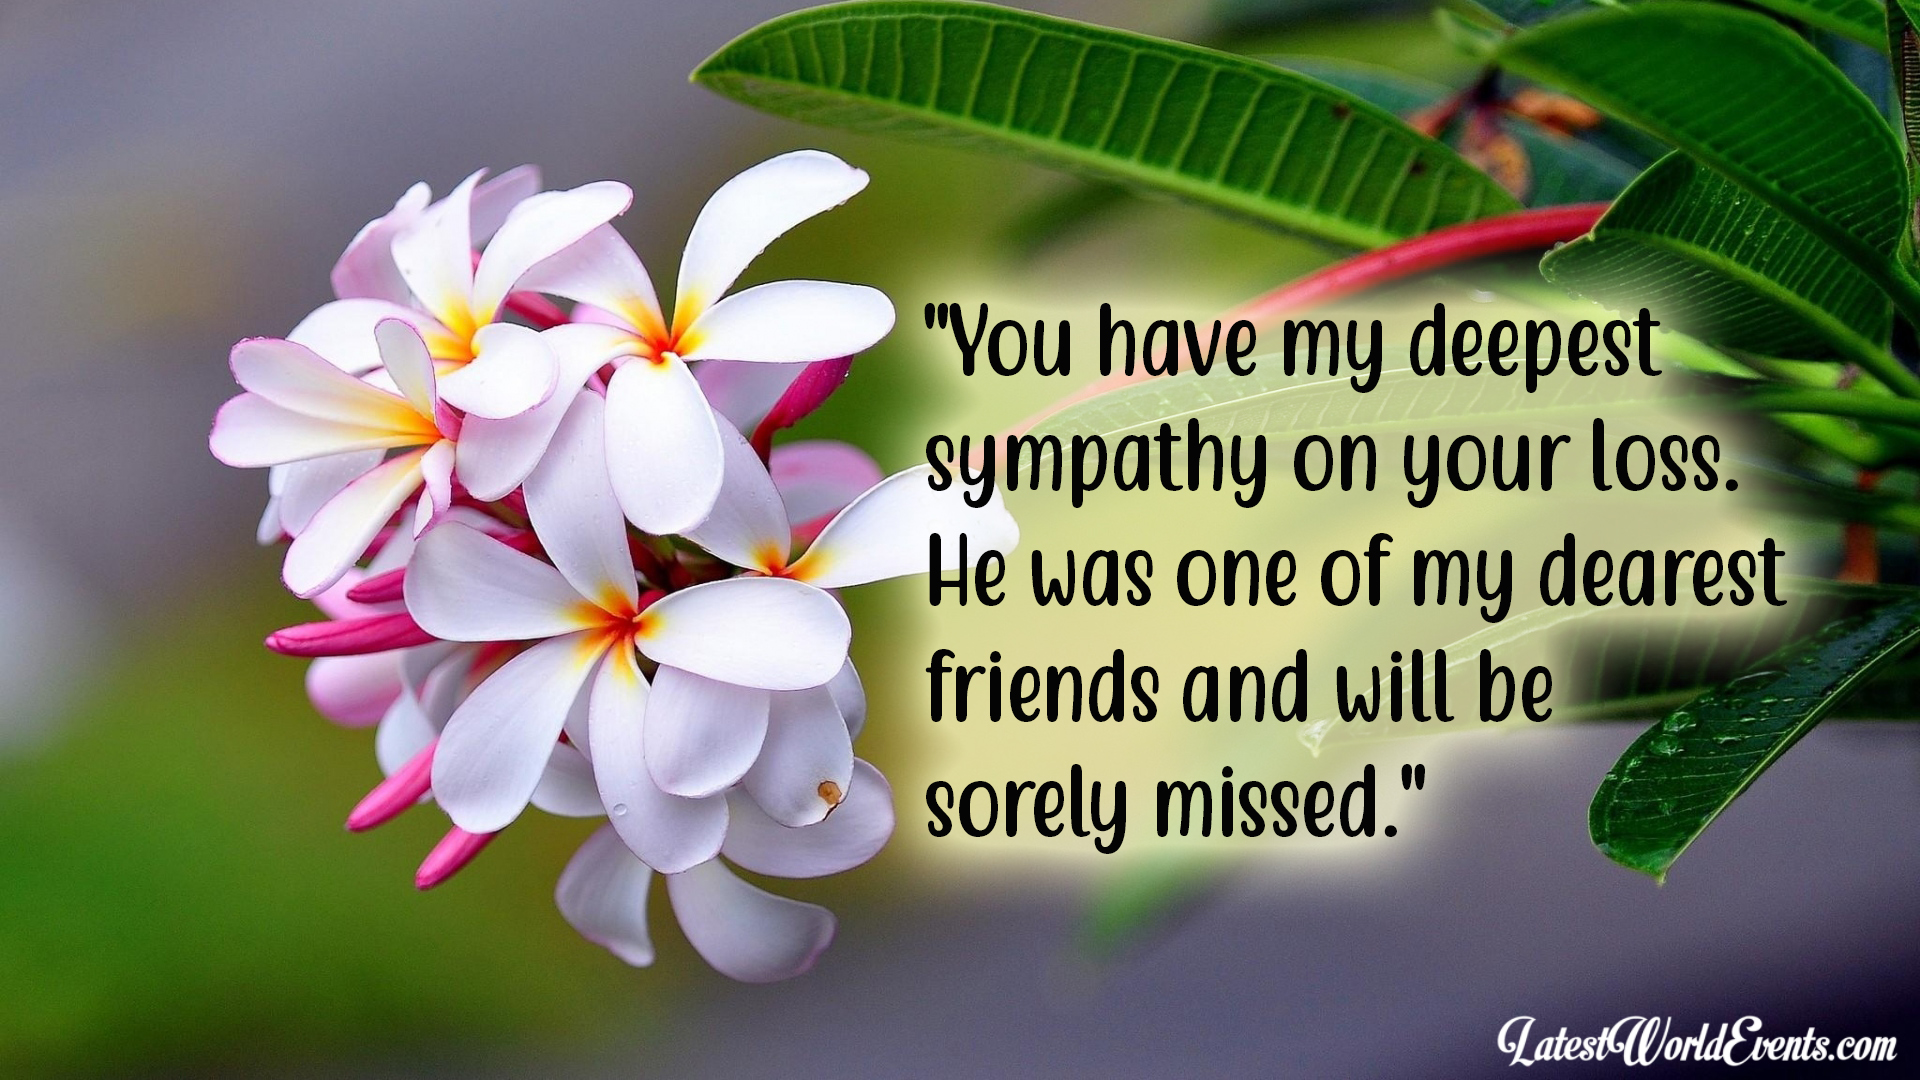 Condolence quotes for a friend & Deepest sympathy image and quotes